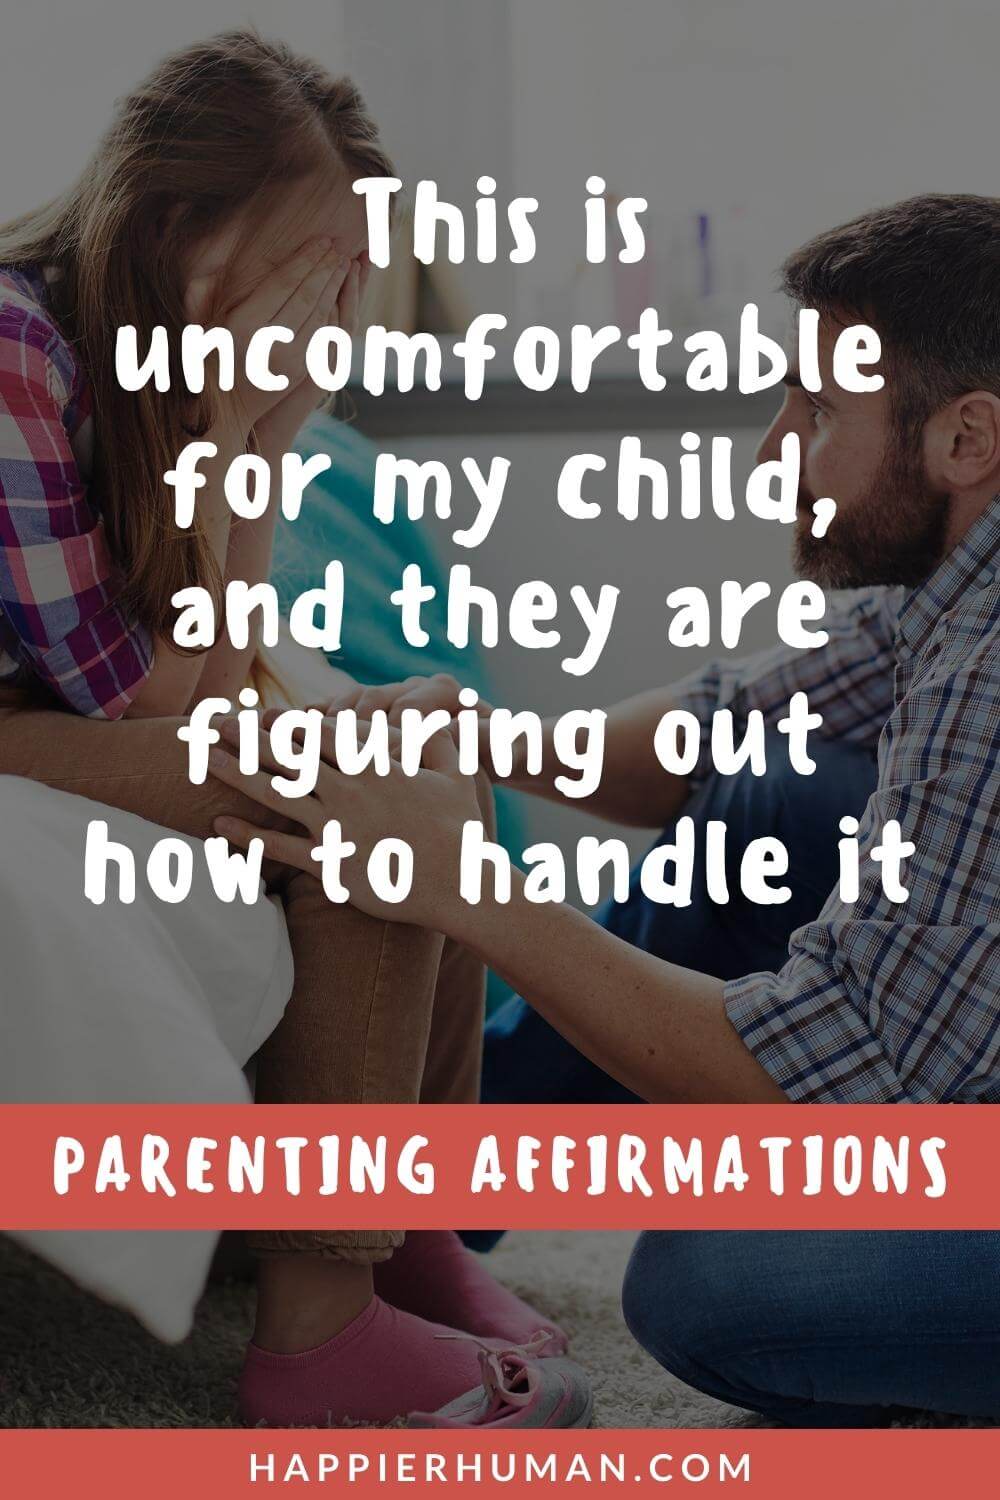 Parenting Affirmations - This is uncomfortable for my child, and they are figuring out how to handle it | mindful parenting affirmations | good parenting affirmations | daily parenting affirmations